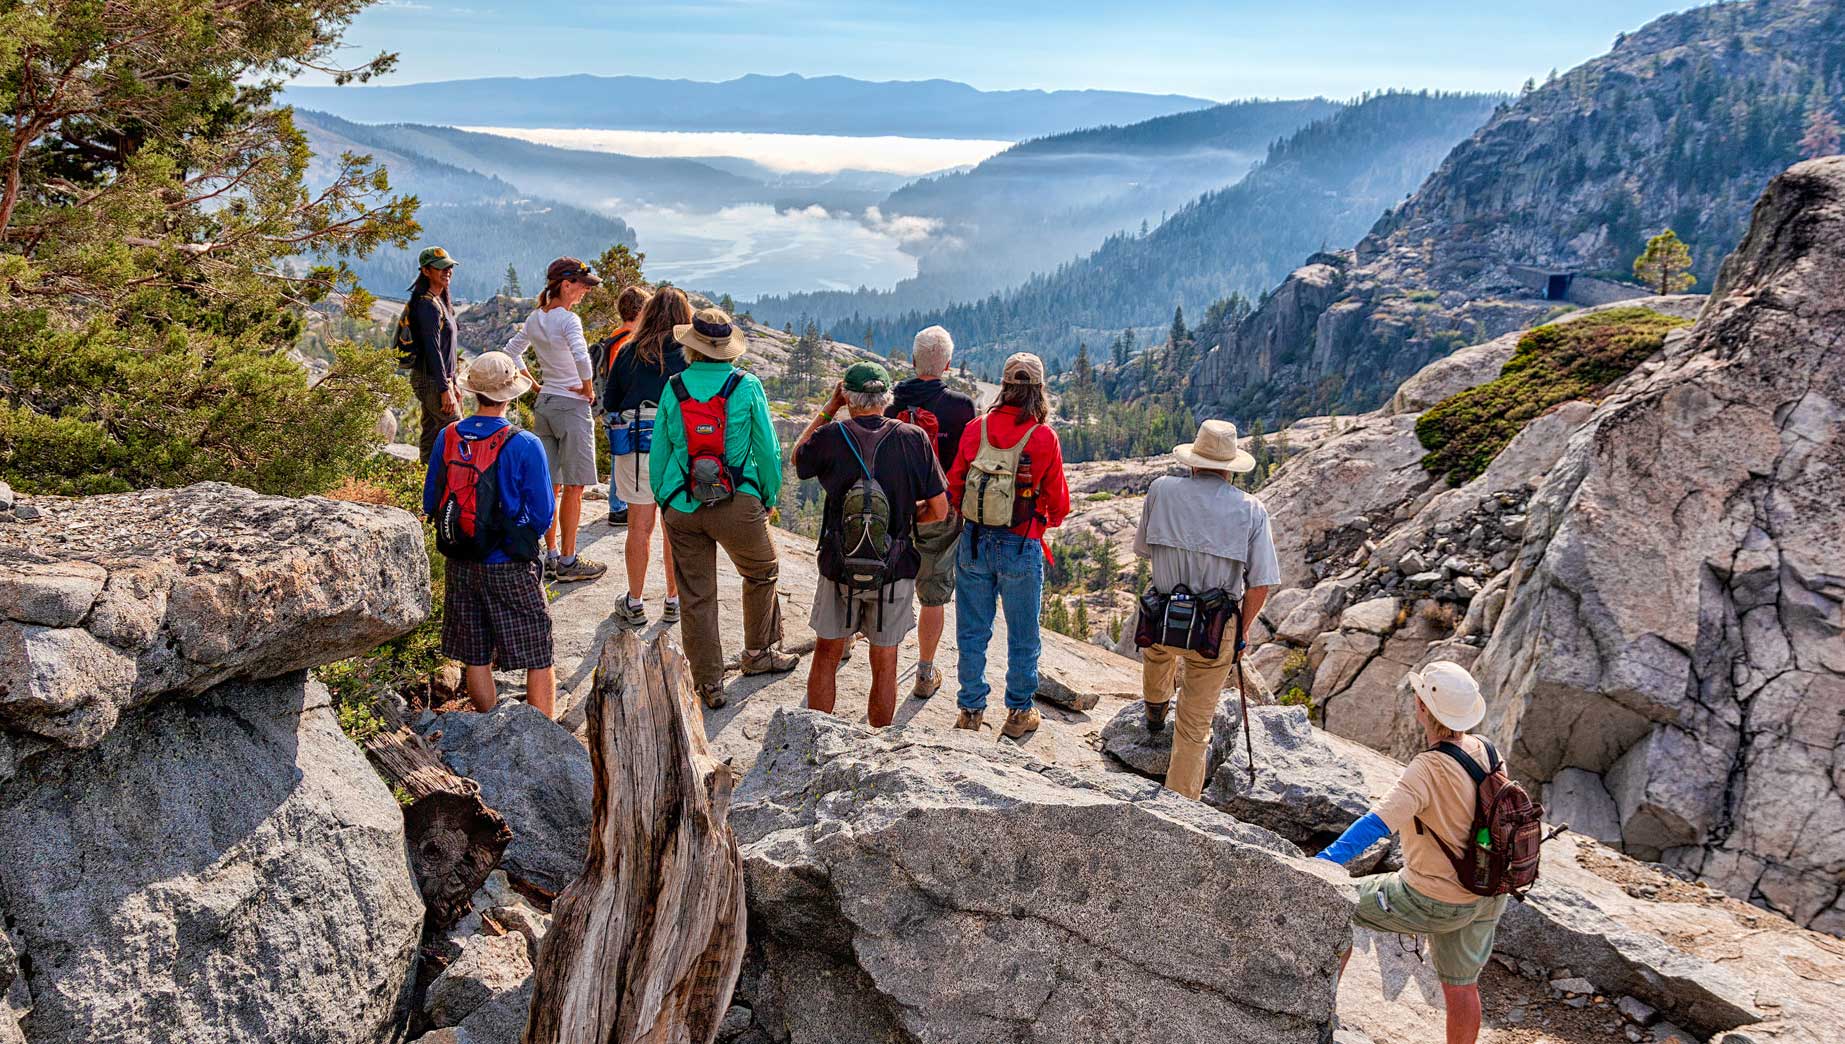 Donner Party Hike